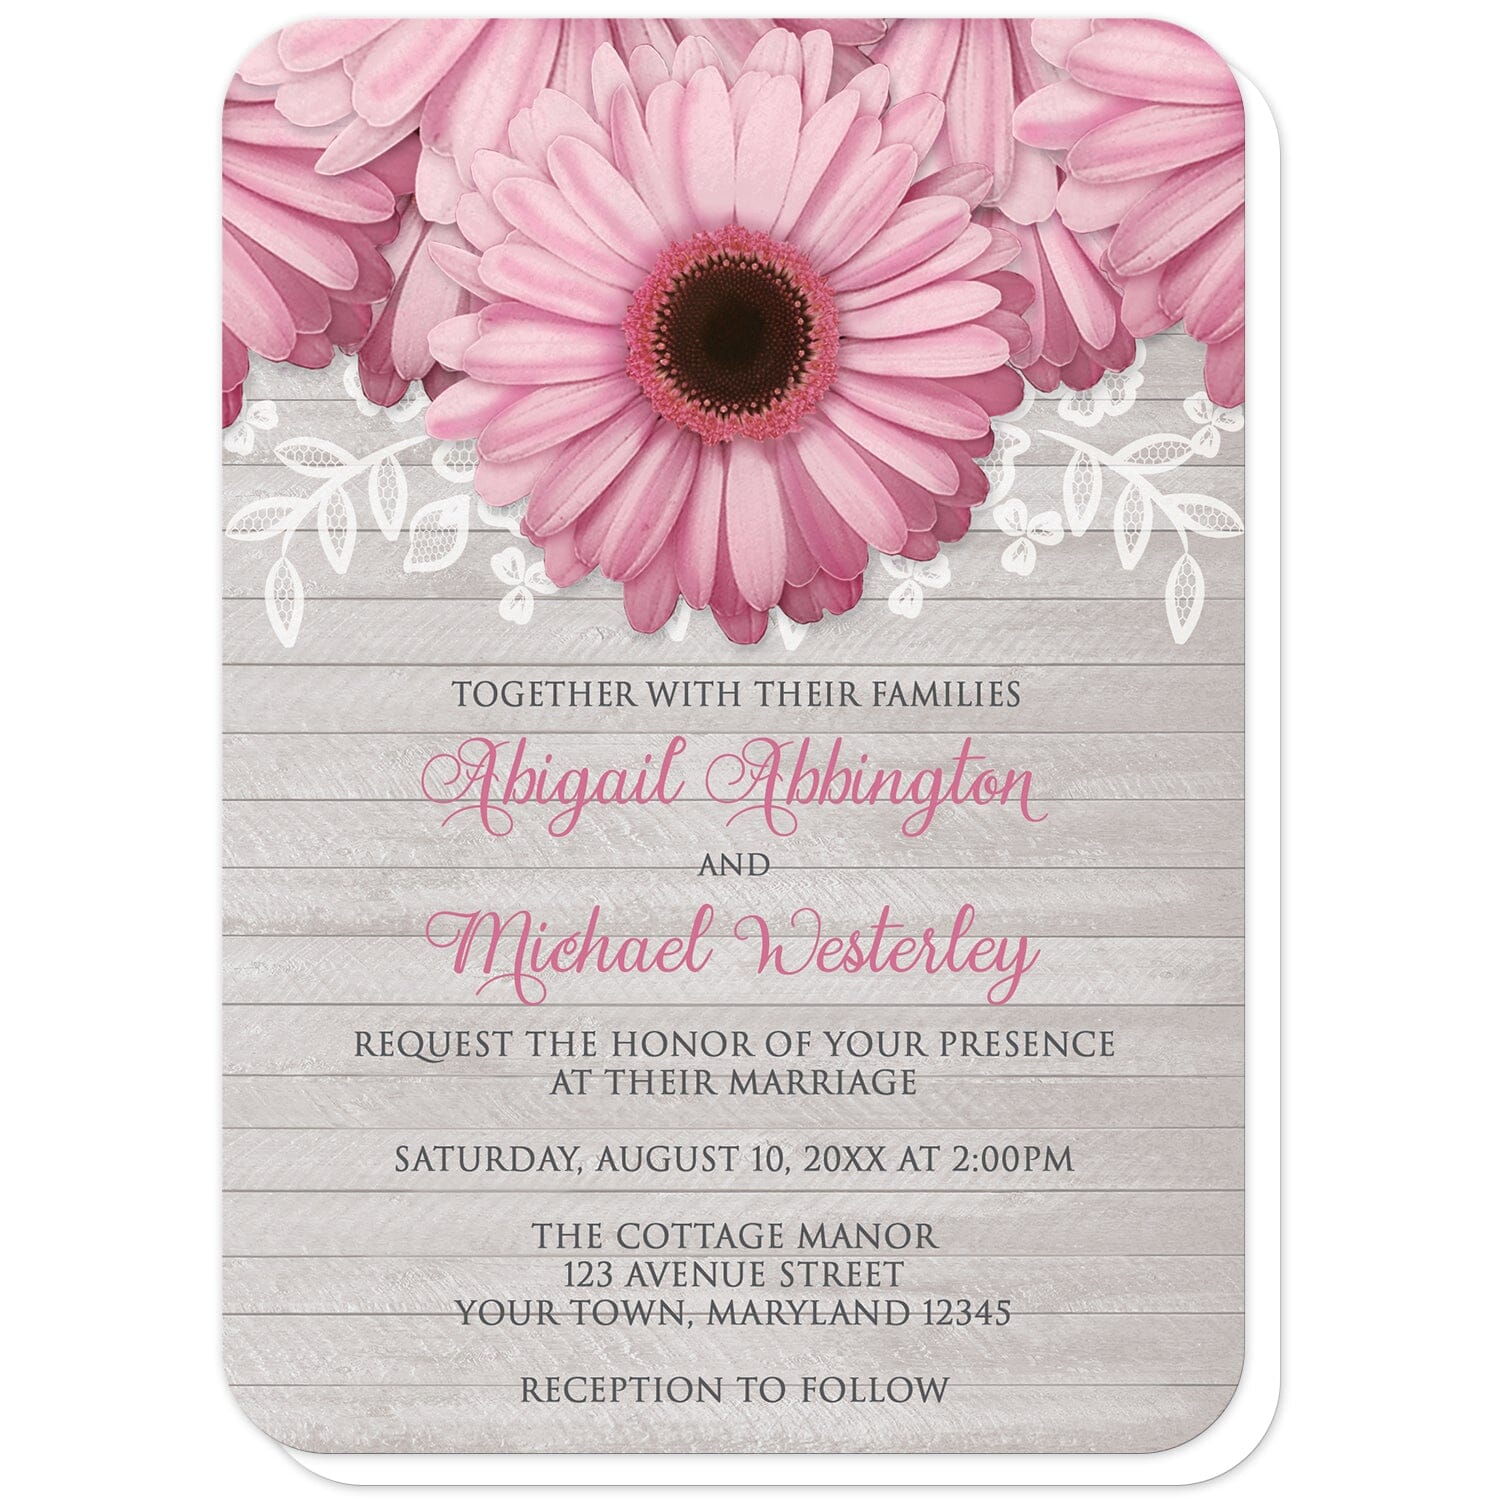 Rustic Pink Daisy Gray Wood Wedding Invitations (with rounded corners) at Artistically Invited. Rustic pink daisy gray wood wedding invitations designed with large and lovely pink daisy flowers with a white lace overlay along the top over a light gray wood background illustration. Your personalized marriage celebration details are custom printed in pink and dark gray over the wood background design below the pretty pink daisies.